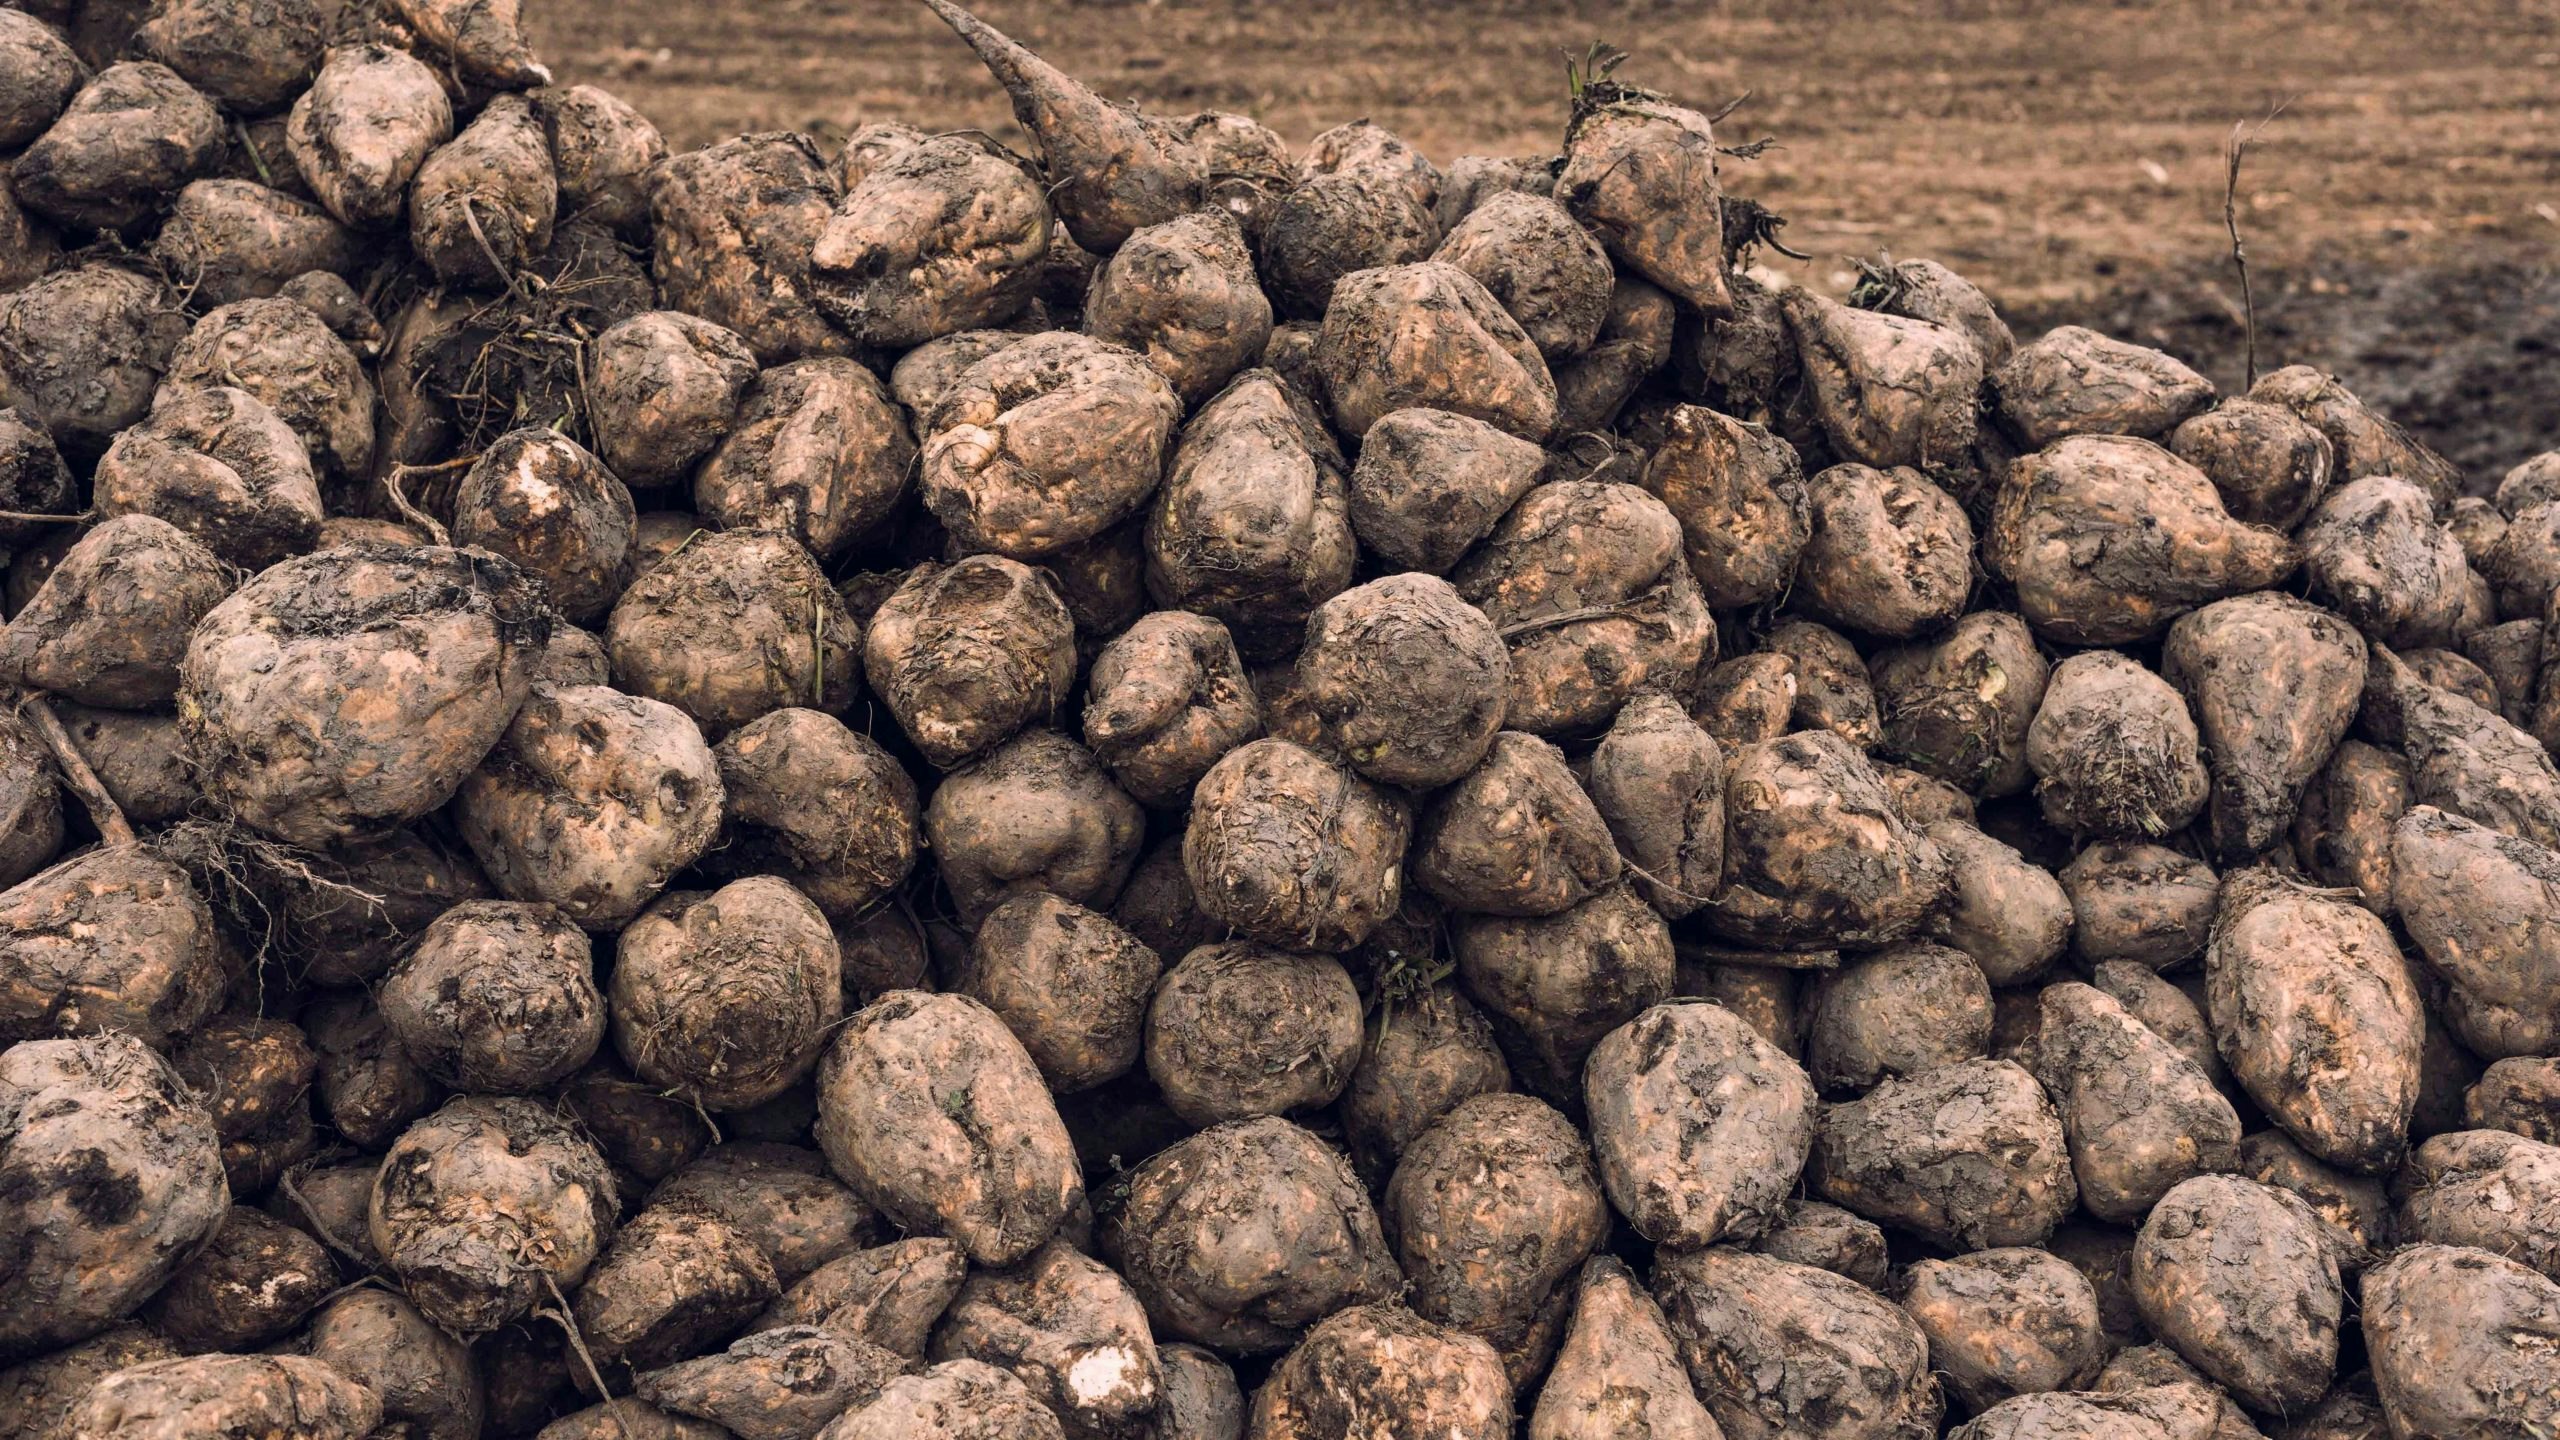 Sugar beets scaled